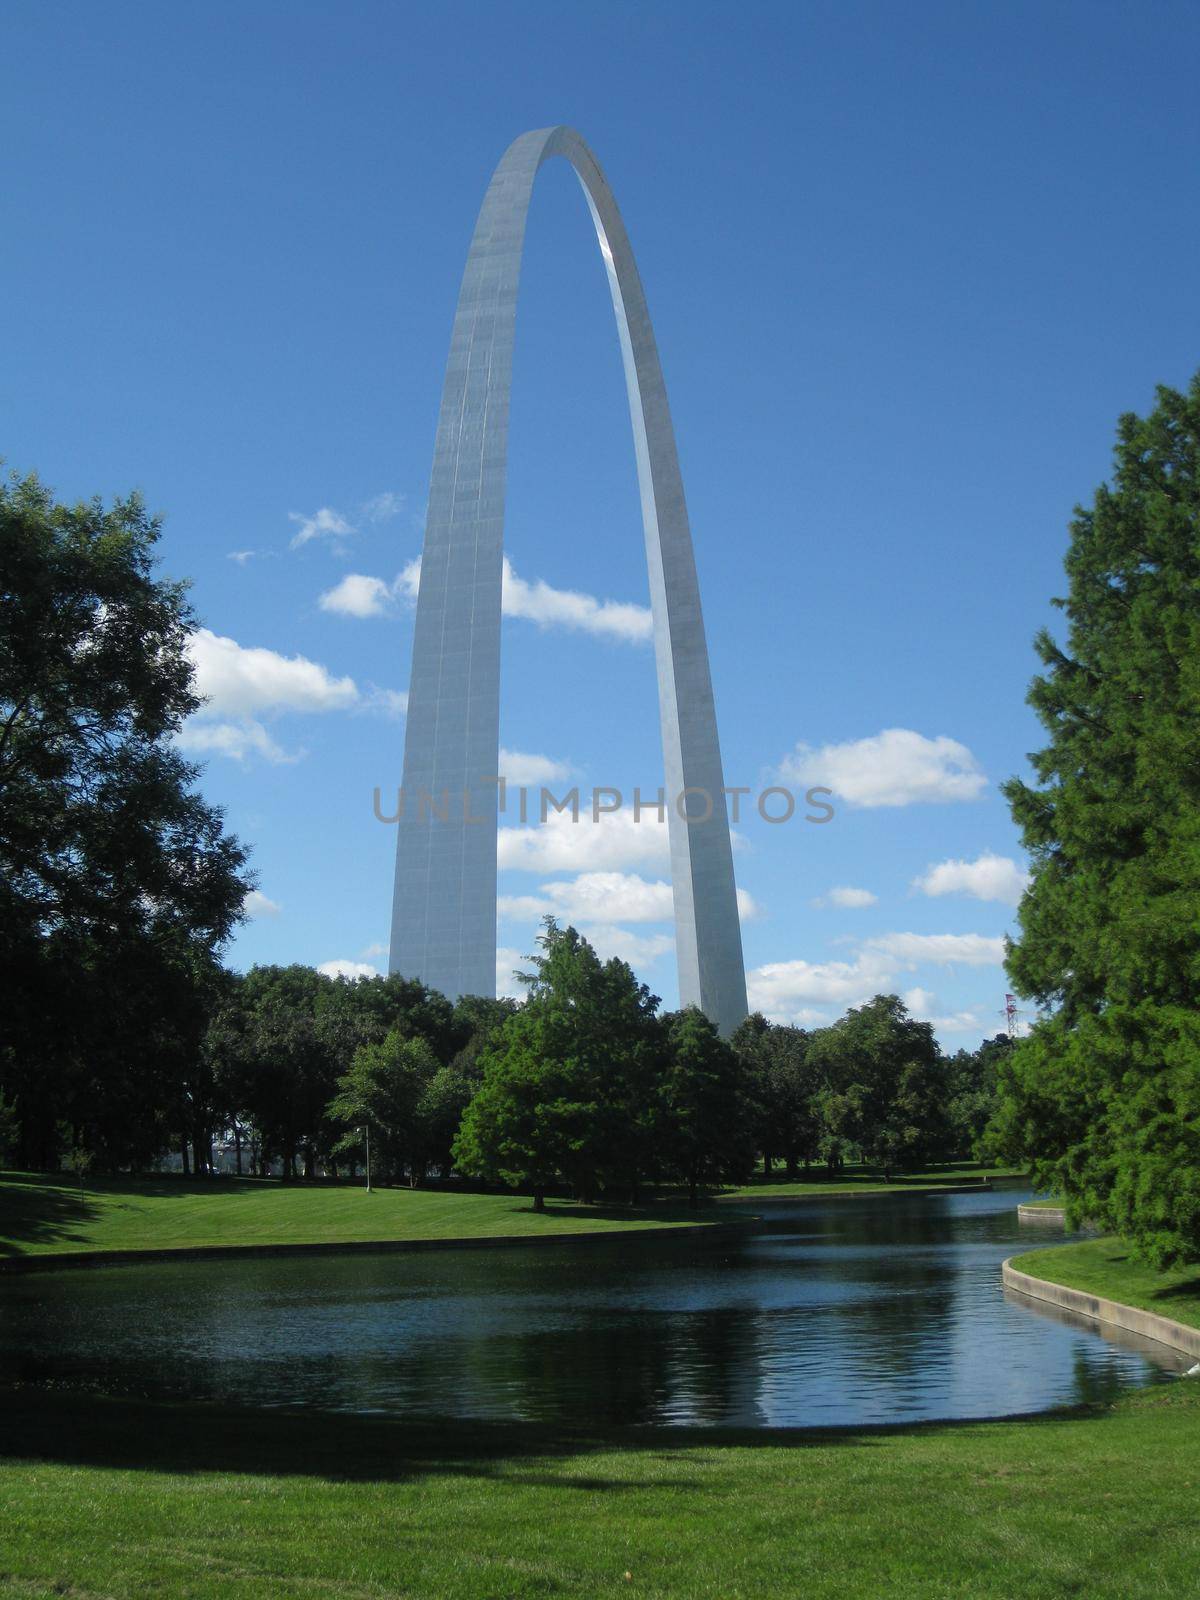 The St Louis Arch with a pool and trees at its base by njproductions